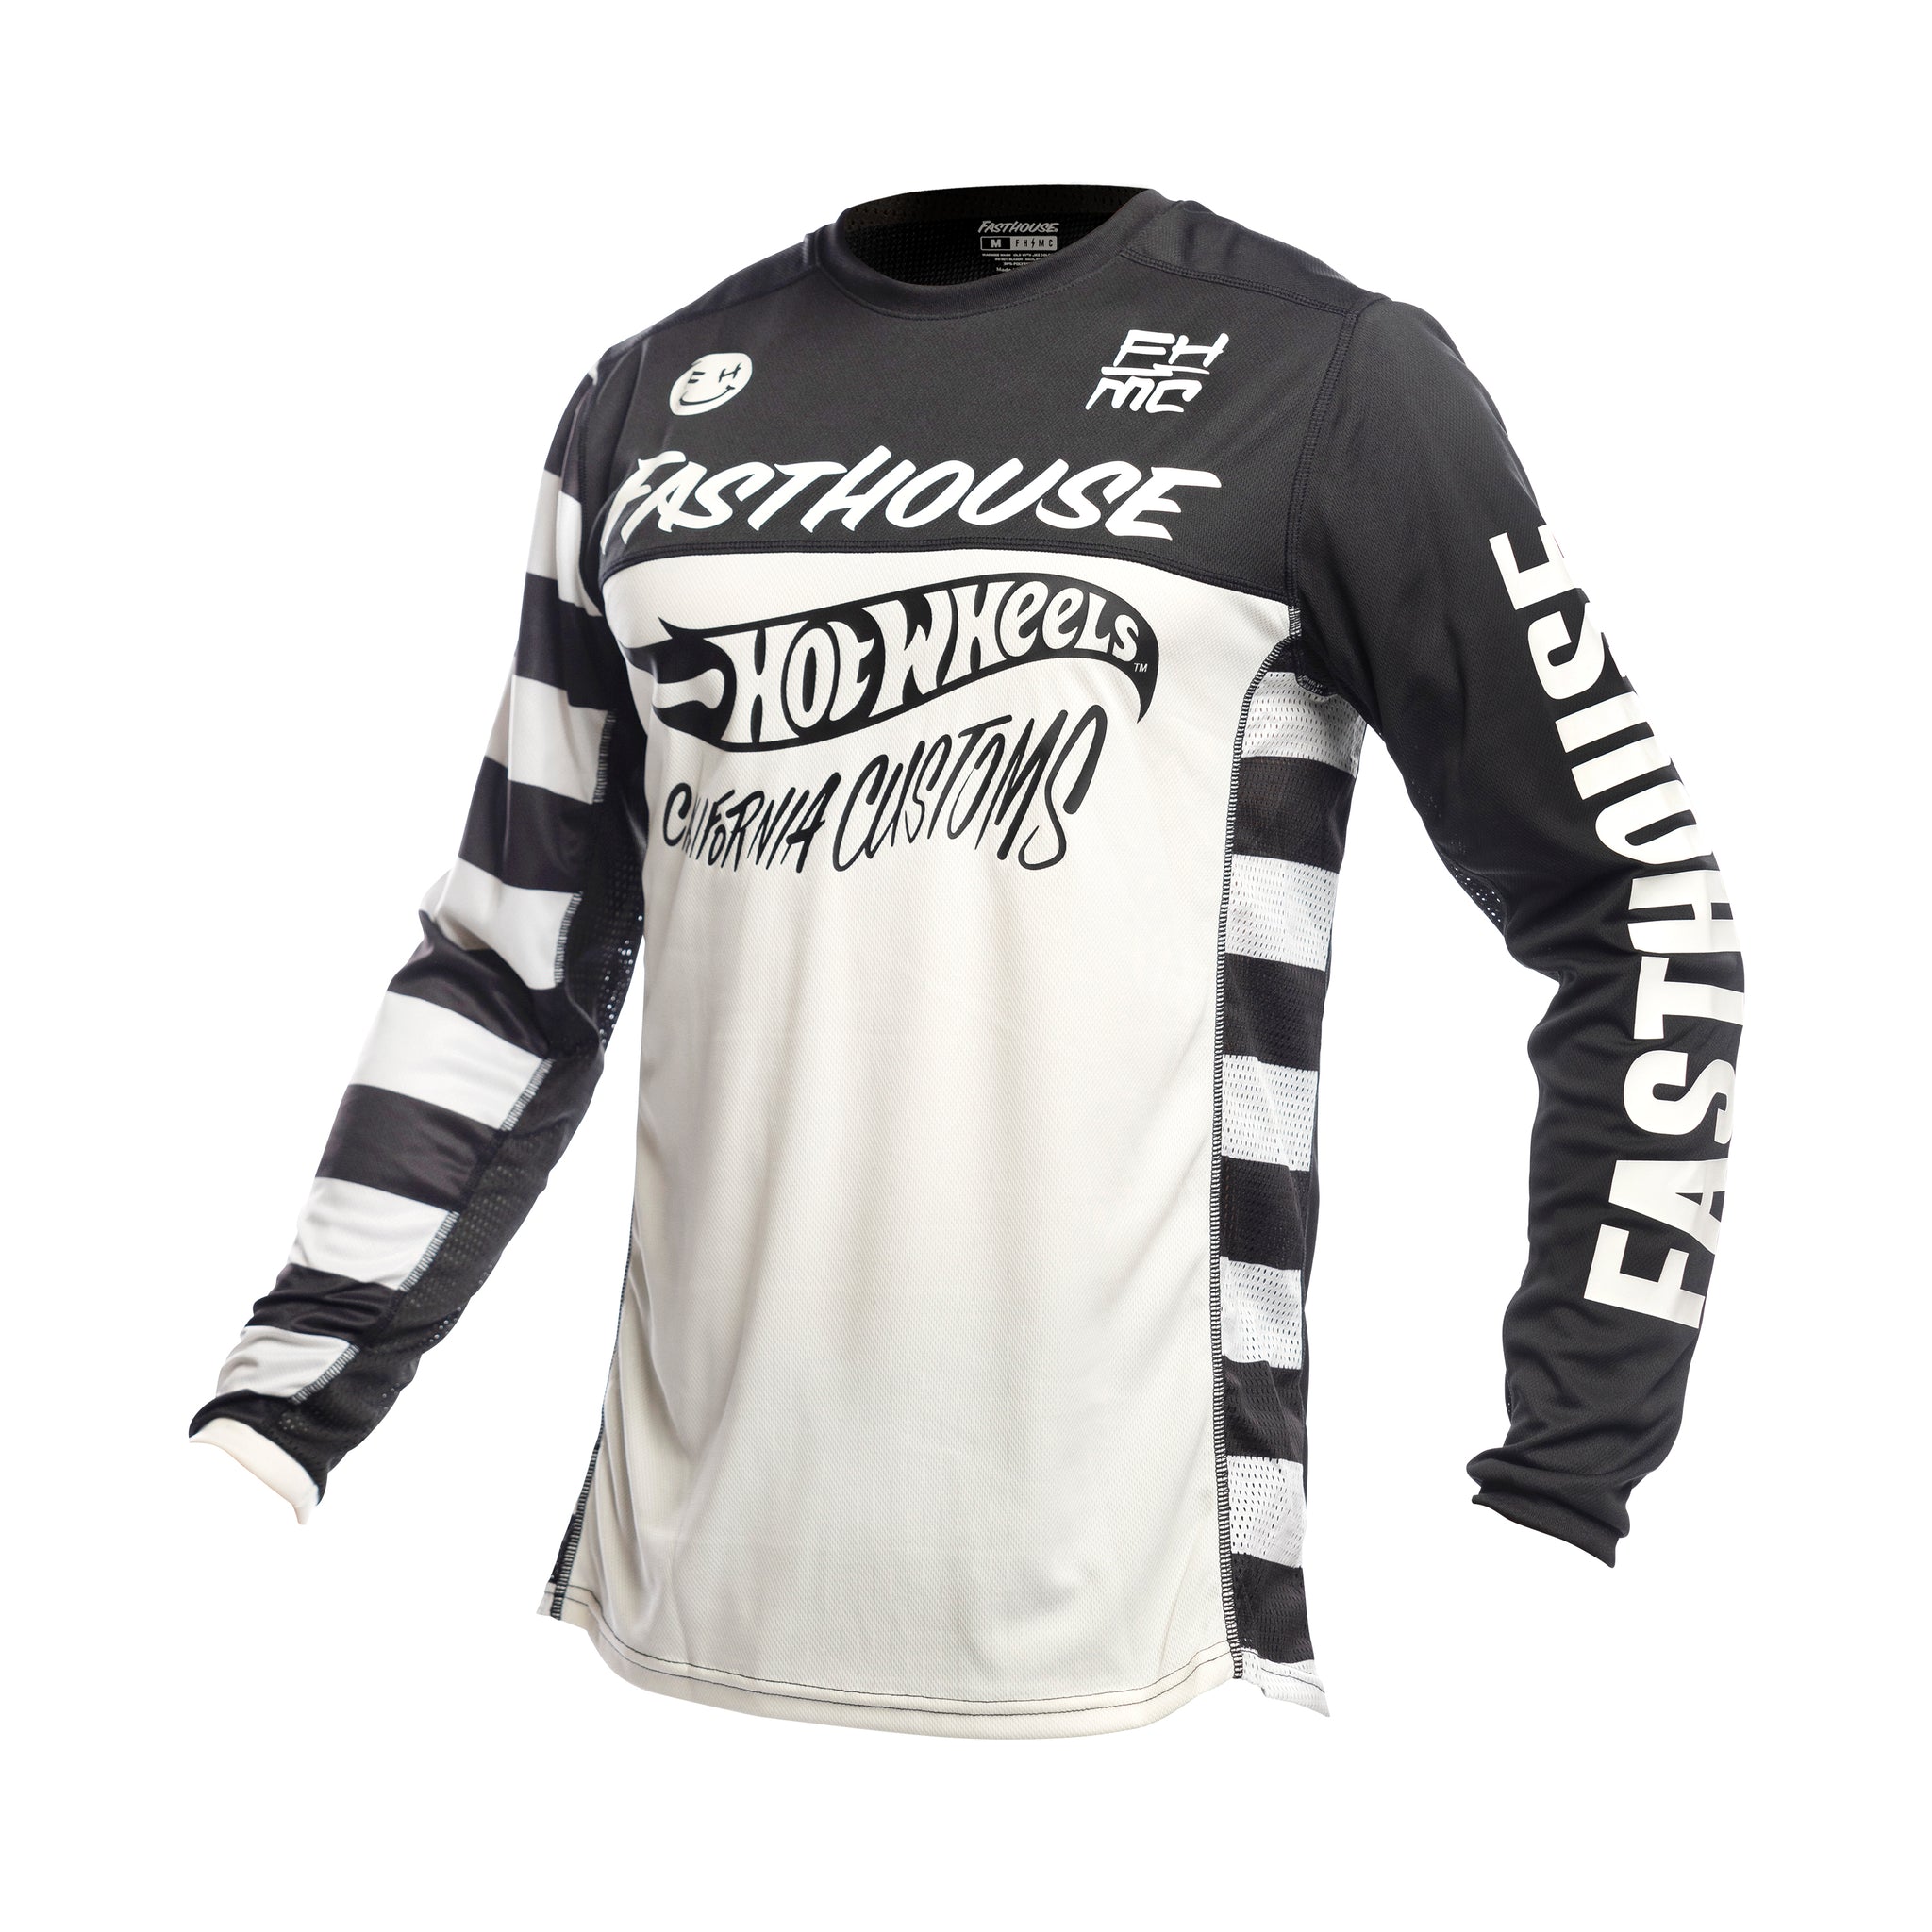 Hot Wheels Grindhouse Long Sleeve Youth Jersey - White/ Black